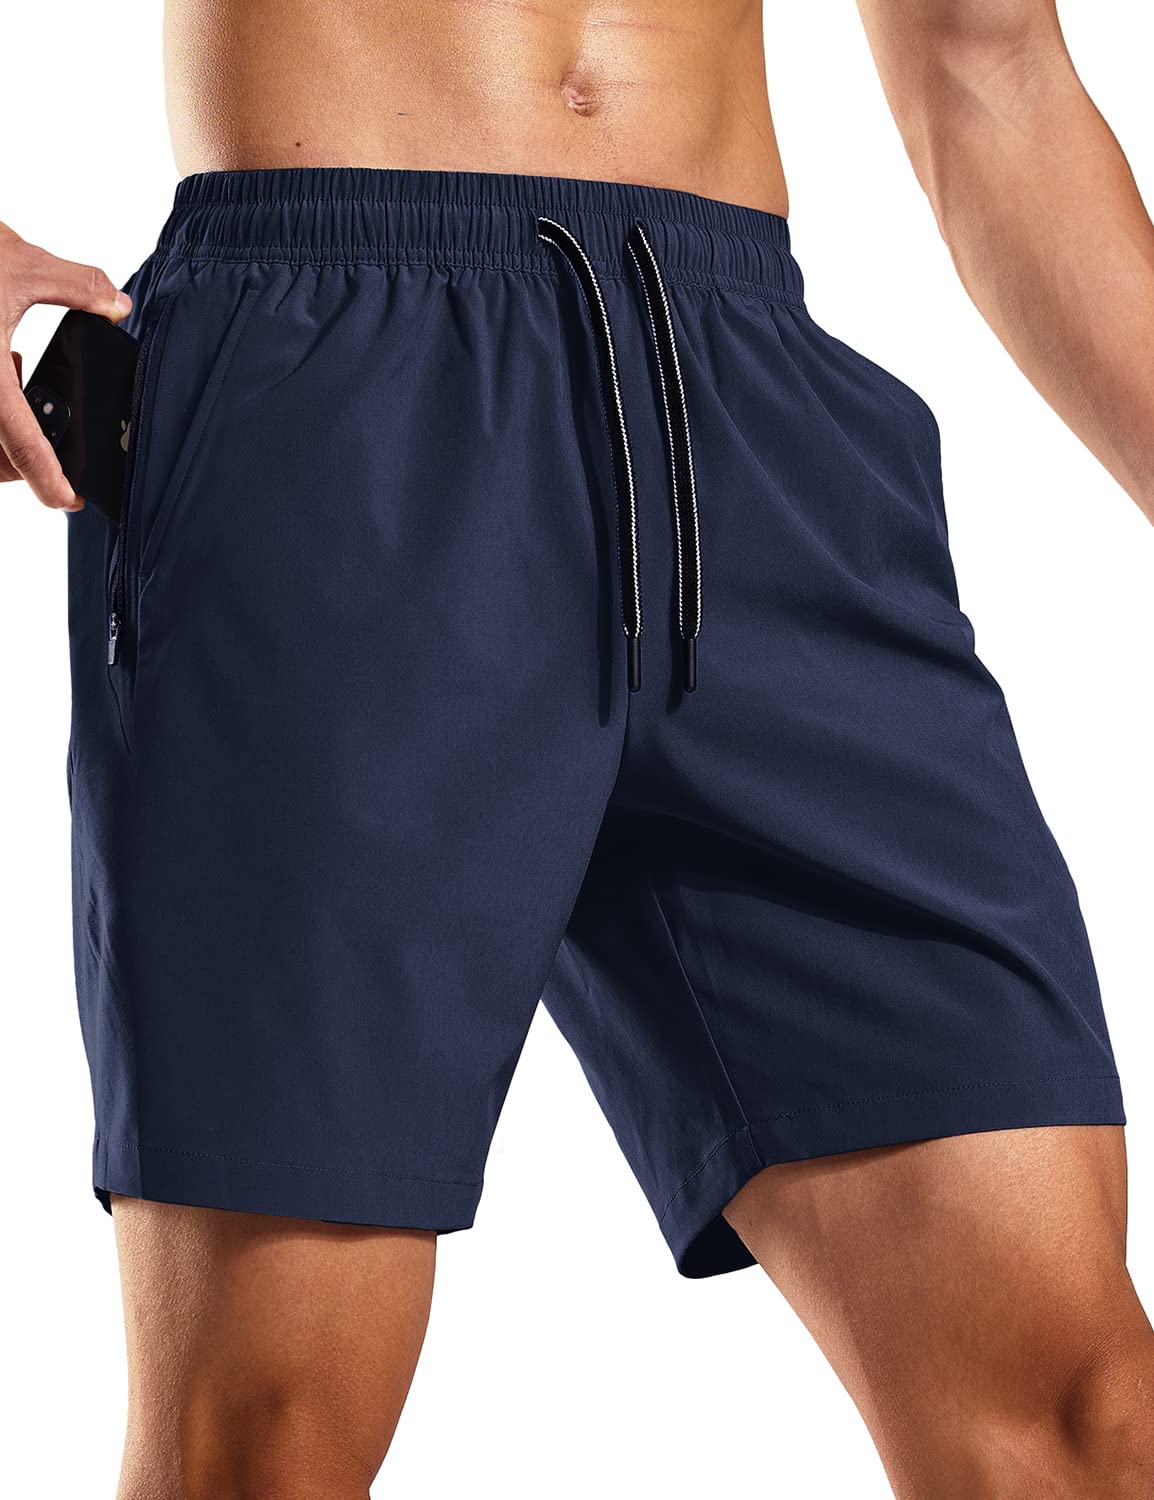 MIER Men's Workout Running Shorts 7 Inch Lightweight Athletic with Zipper  Pockets No Liner Quick-Dry Gym Active Shorts Navy Small